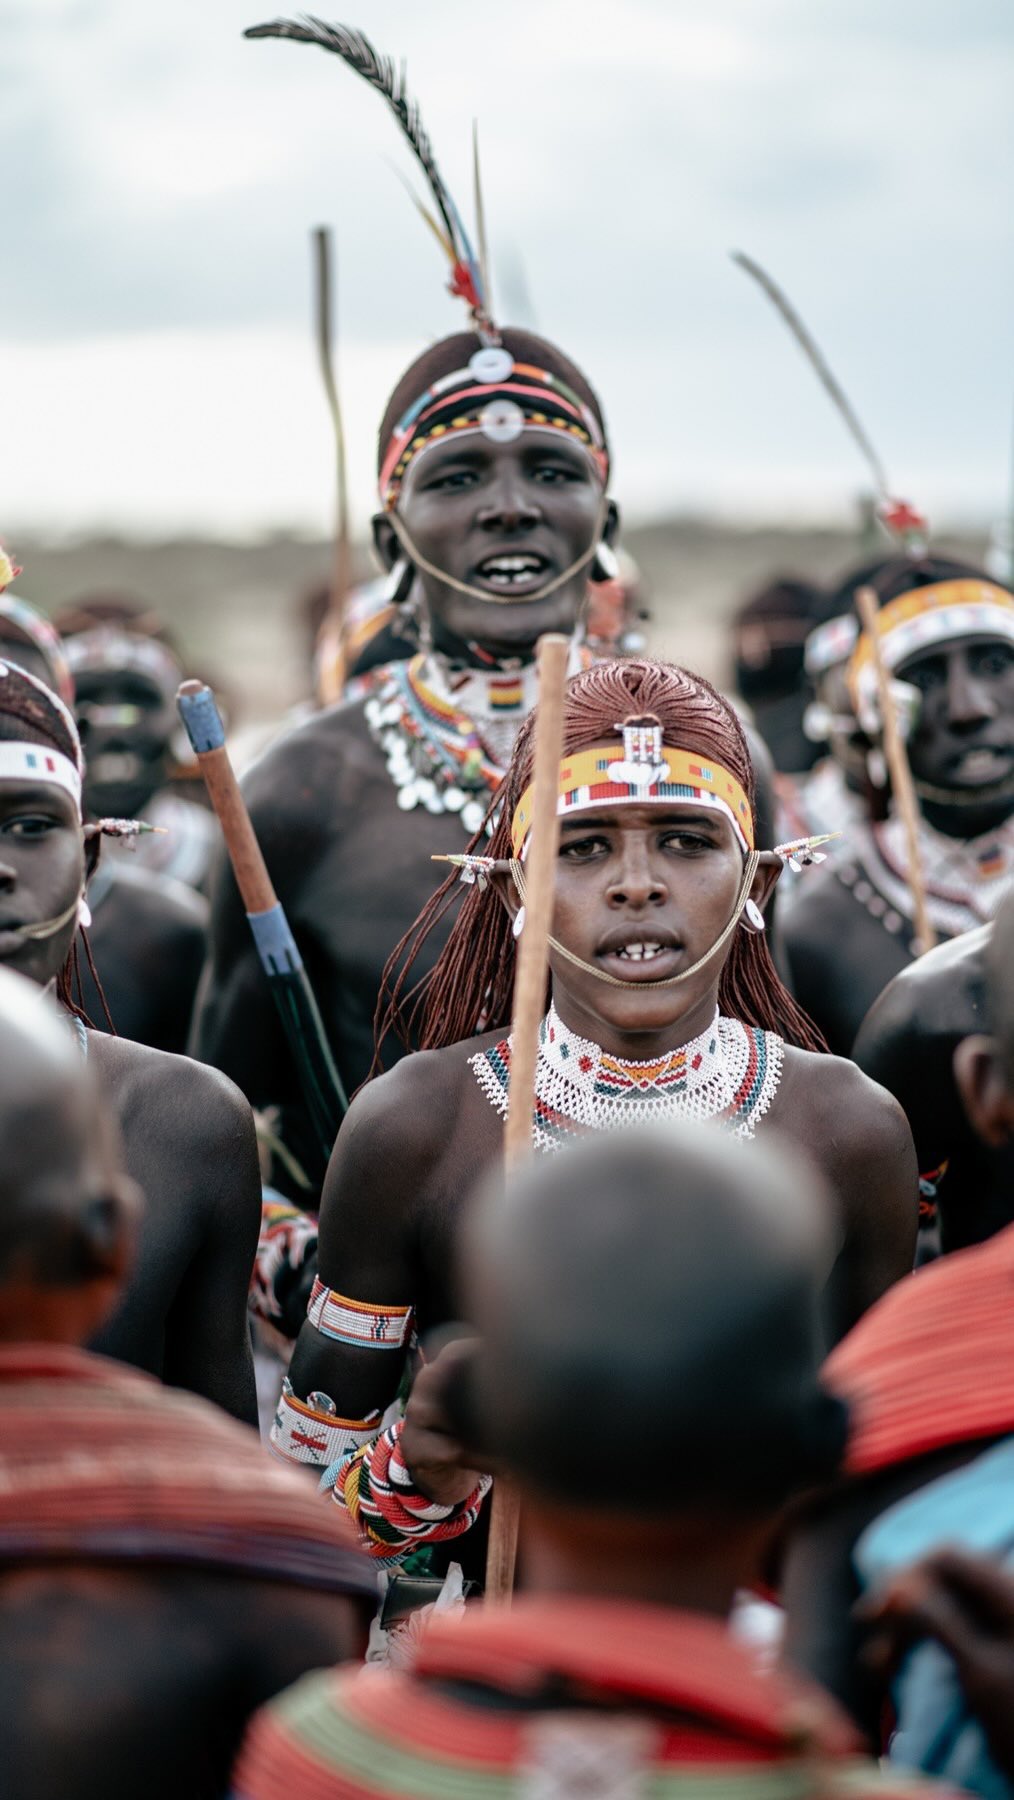 When staying at Sasaab witness Samburu warriors in a spirited display of tradition and valour, as they leap towards the sky in a friendly yet fierce competition. The higher the jump, the greater the display of virility. 

#DiscoverTheSafariCollection #WelcomeToKenya #TheSafariCollection #OnSafari #Safari #Sasaab #SafariActivities #Samburu #SamburuPeople